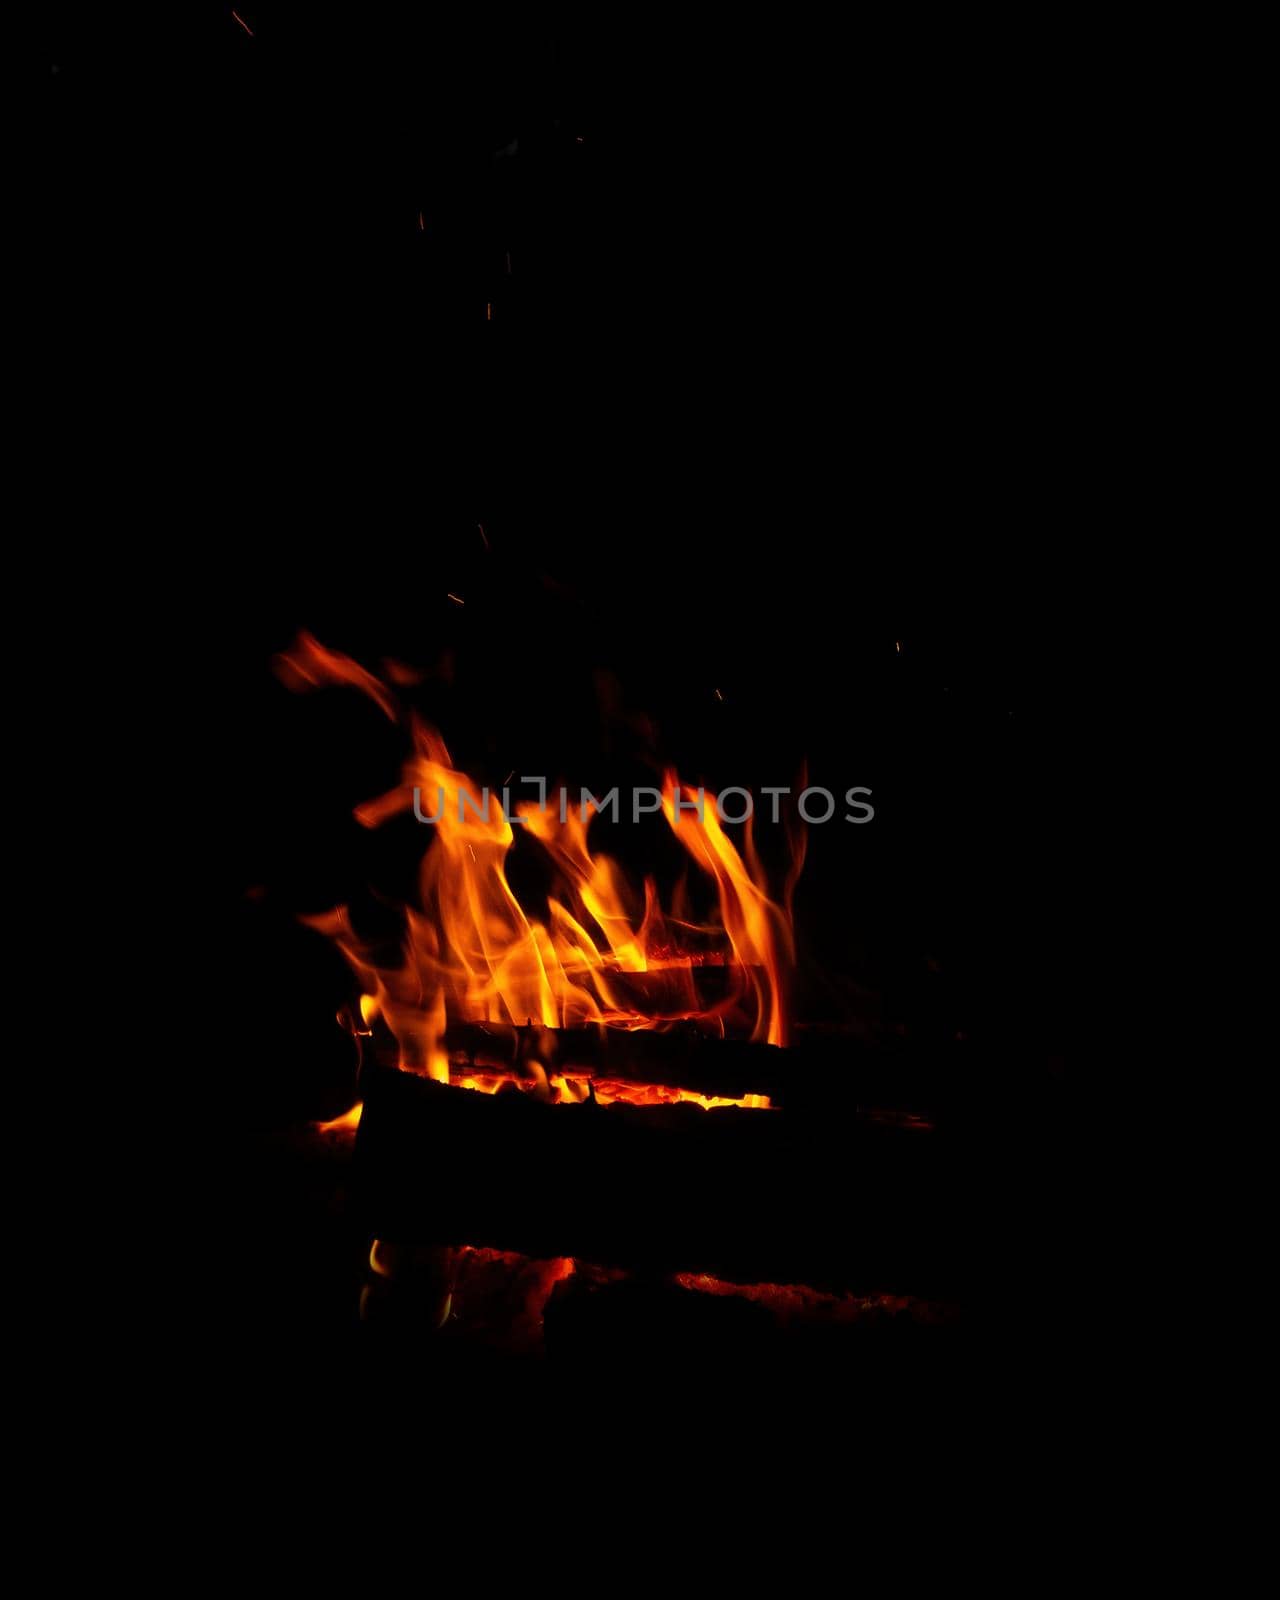 Abstract flame of fire from a campfire on a black background by Andre1ns